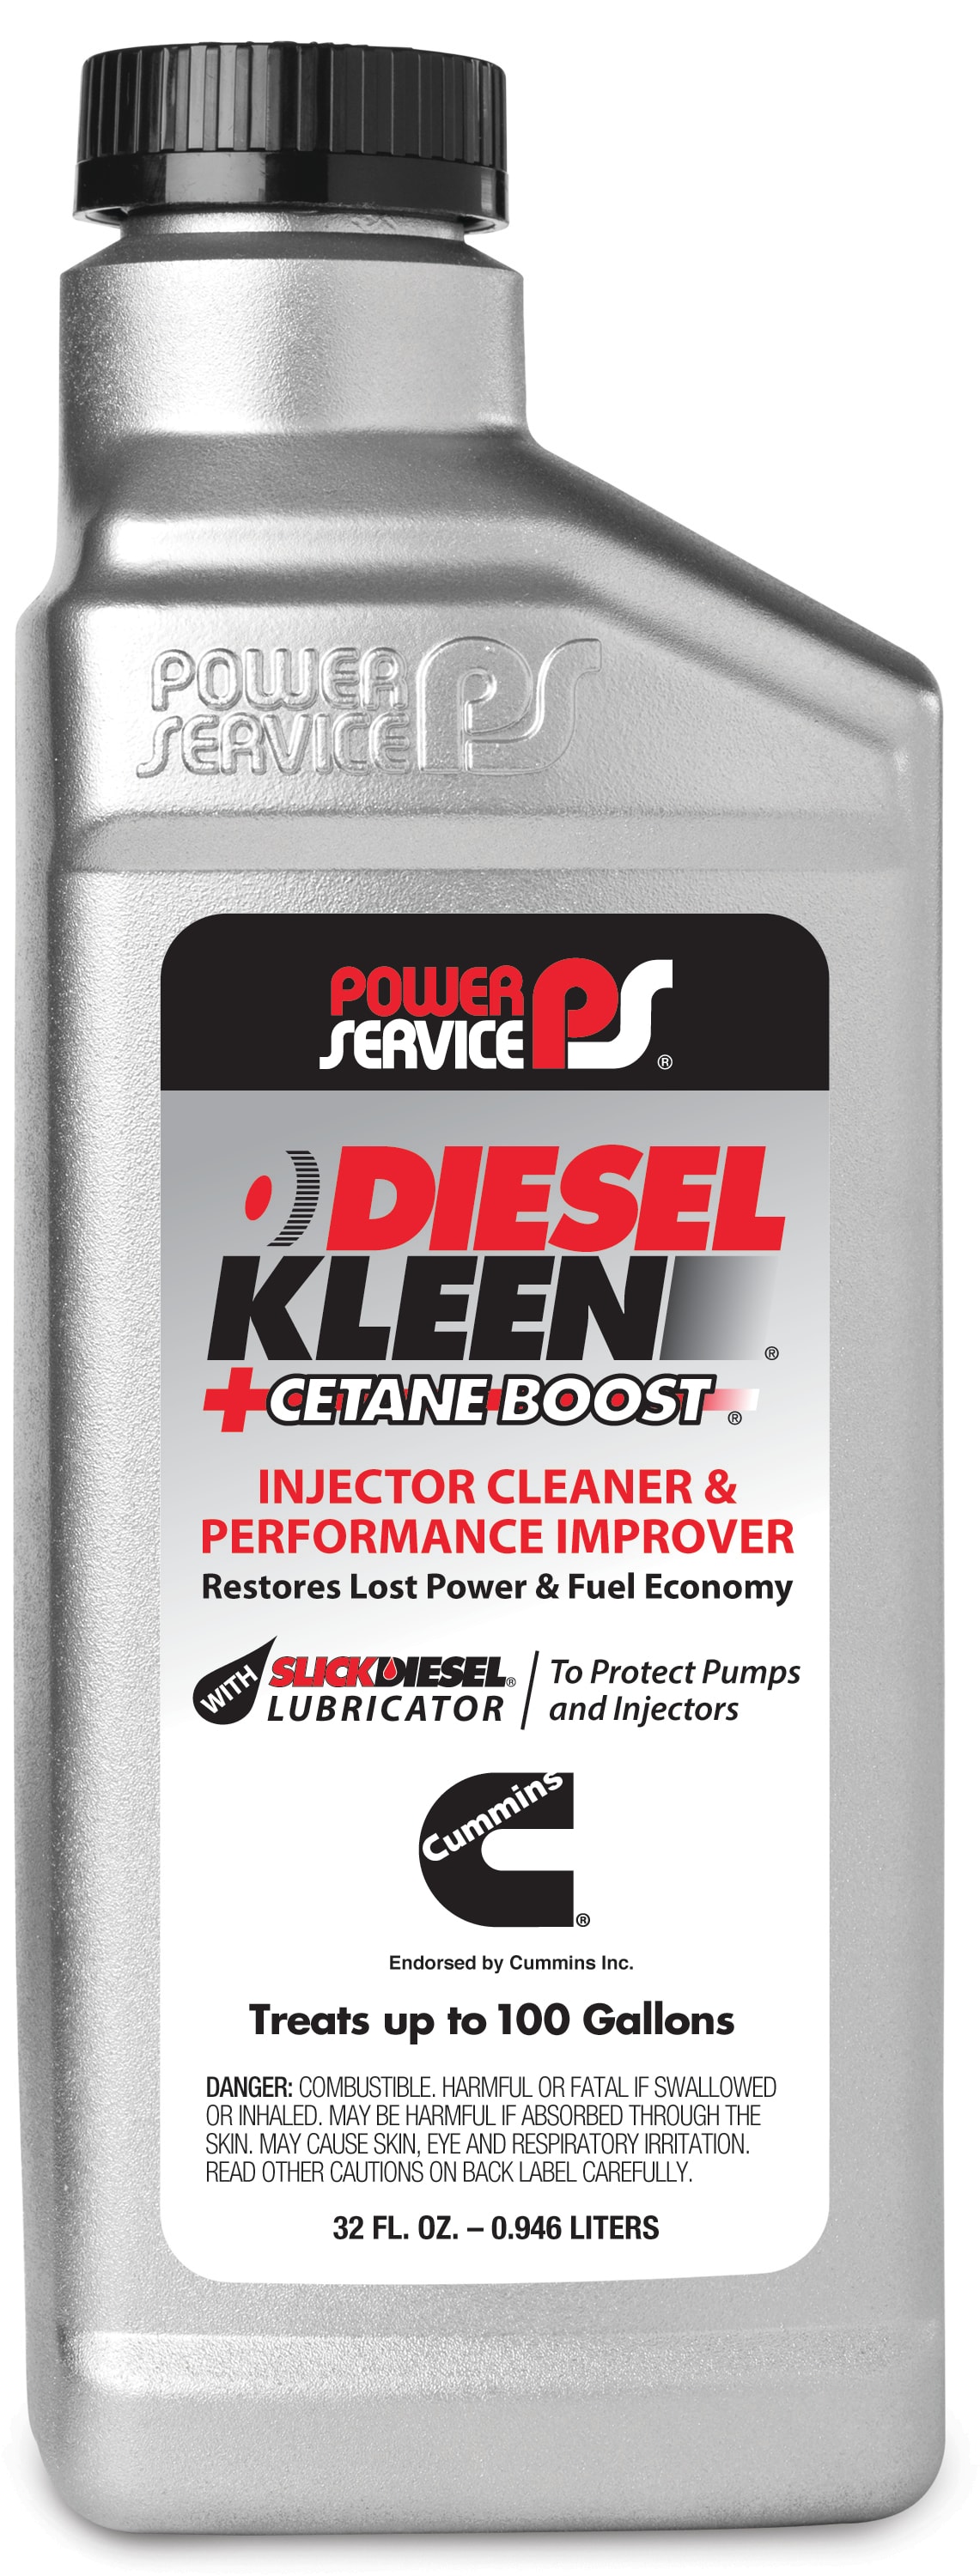 Gumout All-in-One Diesel Fuel System Cleaner, 32 oz.